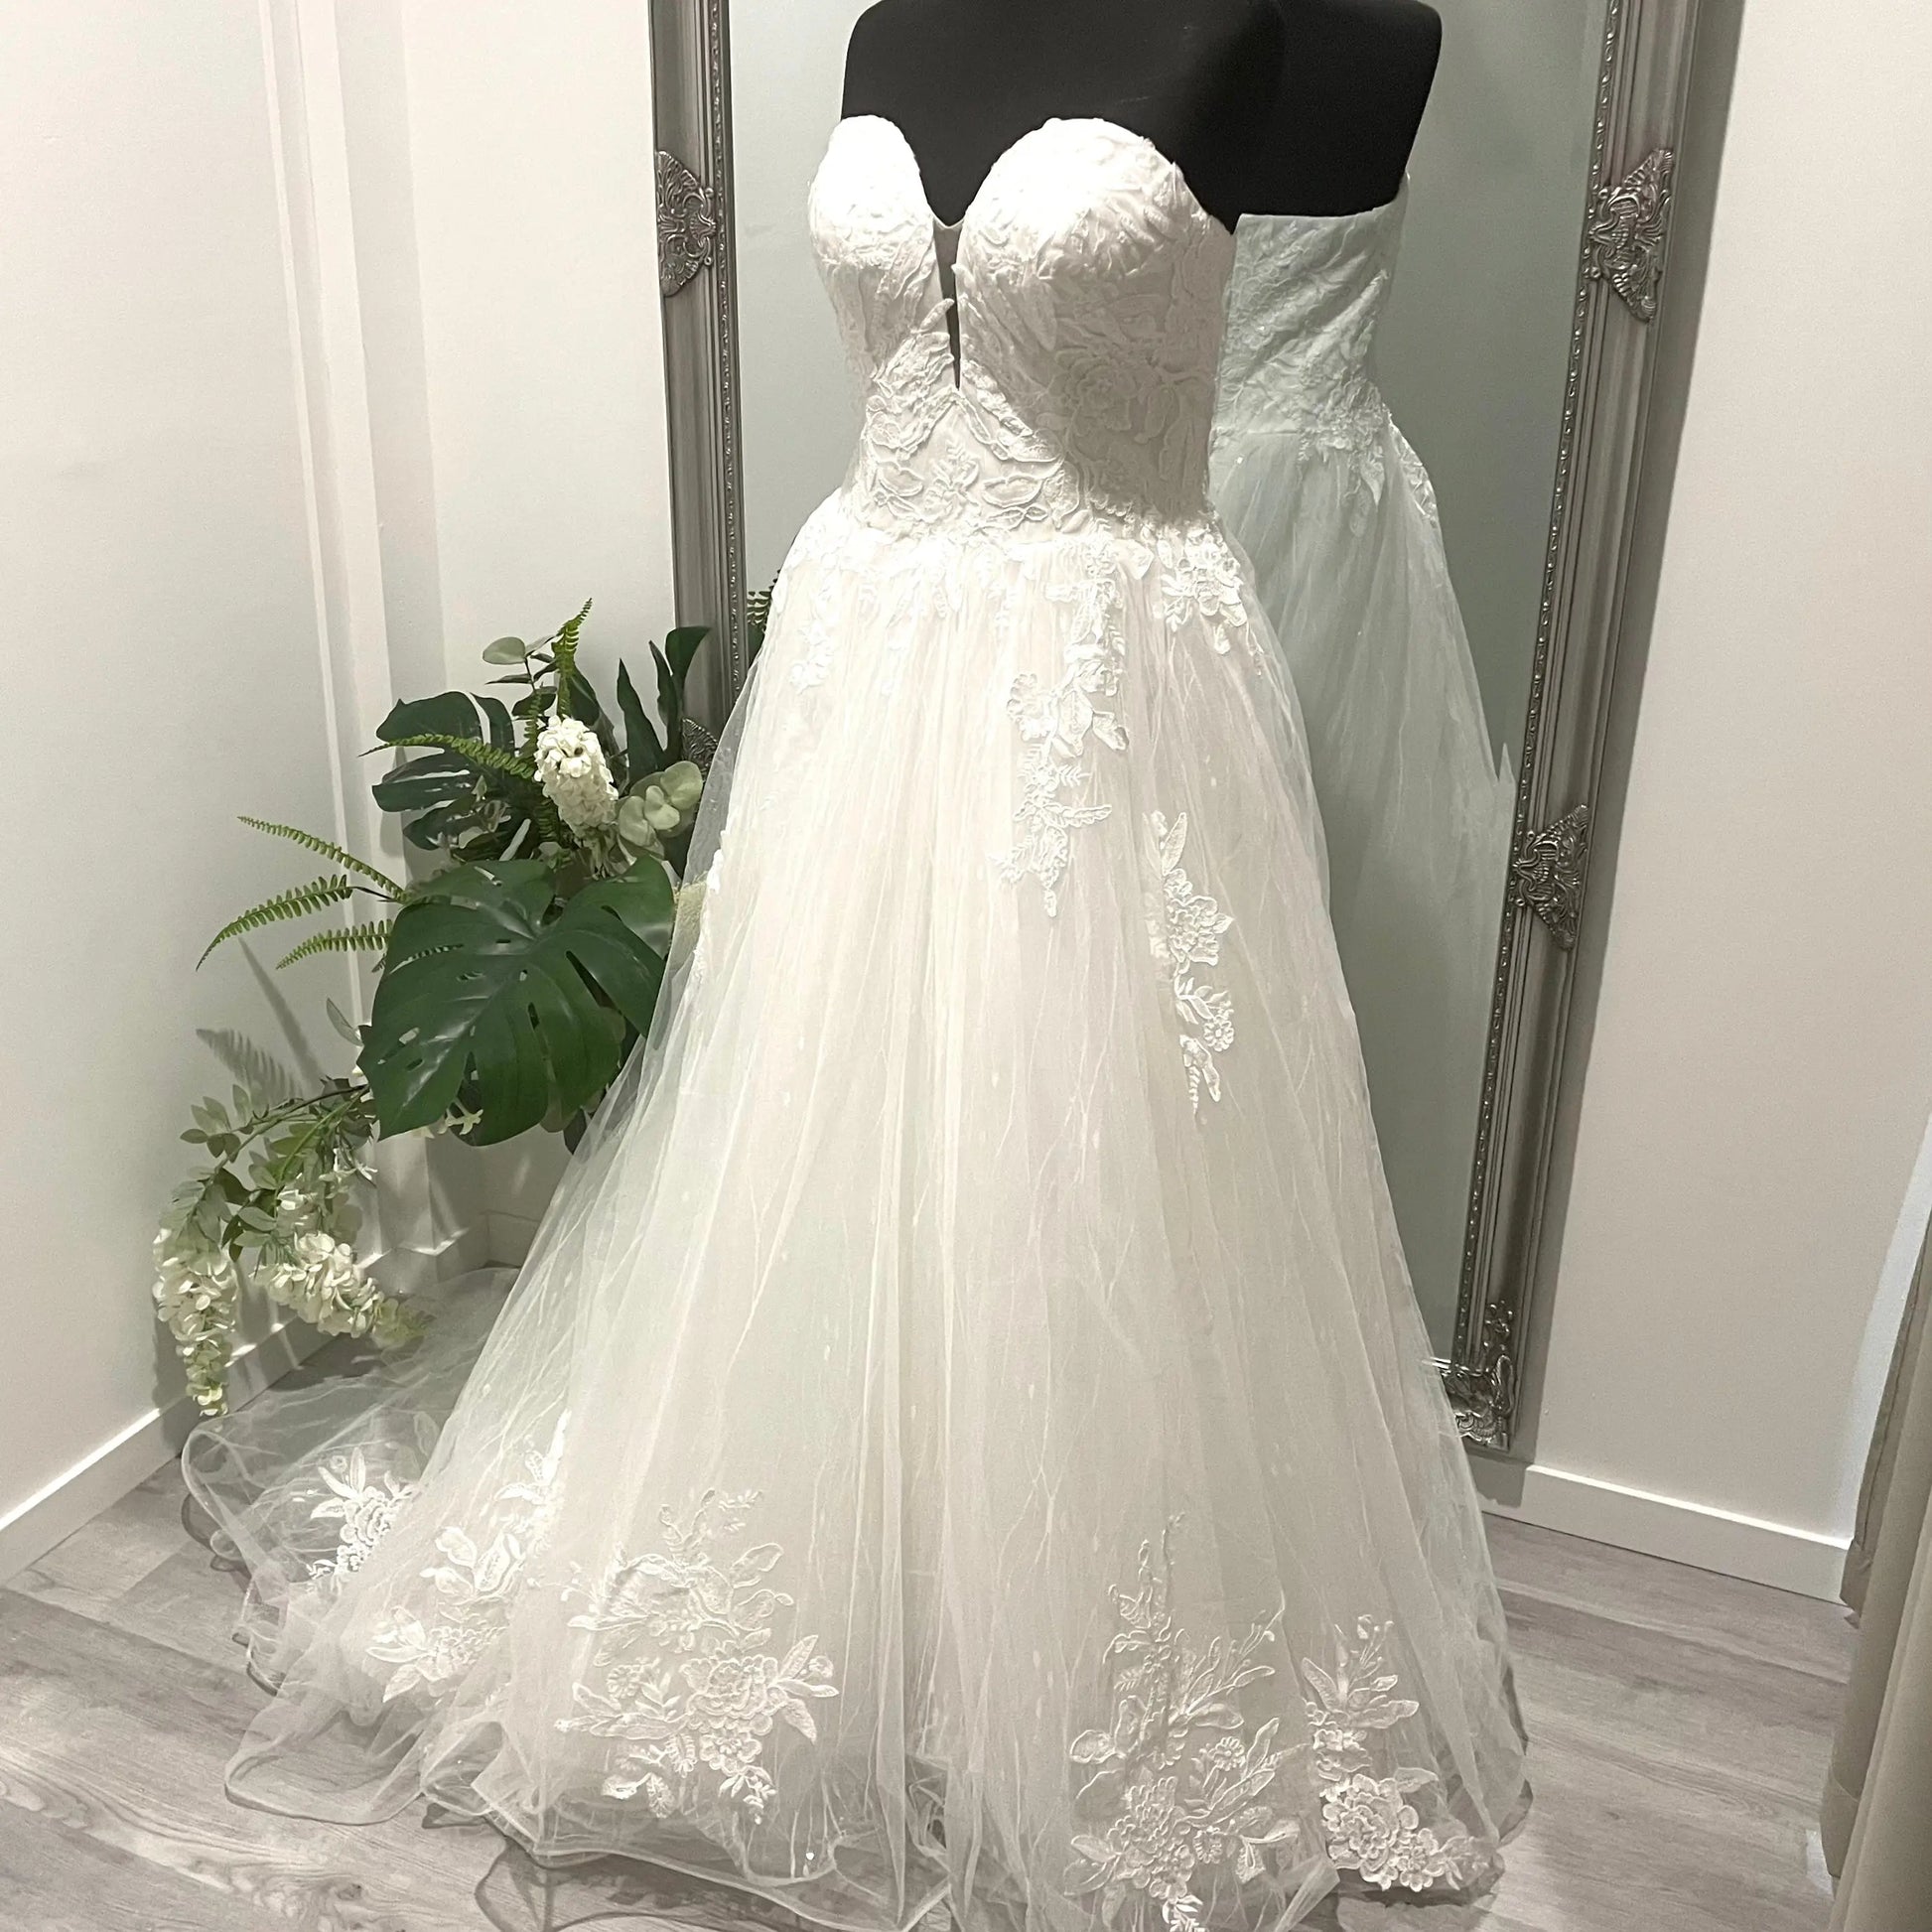 Detailed front view of the Kate wedding gown showcasing its strapless bodice with lace appliqué, flowing seamlessly into a classic ballgown skirt with intricate sequins and a patterned underlayer.